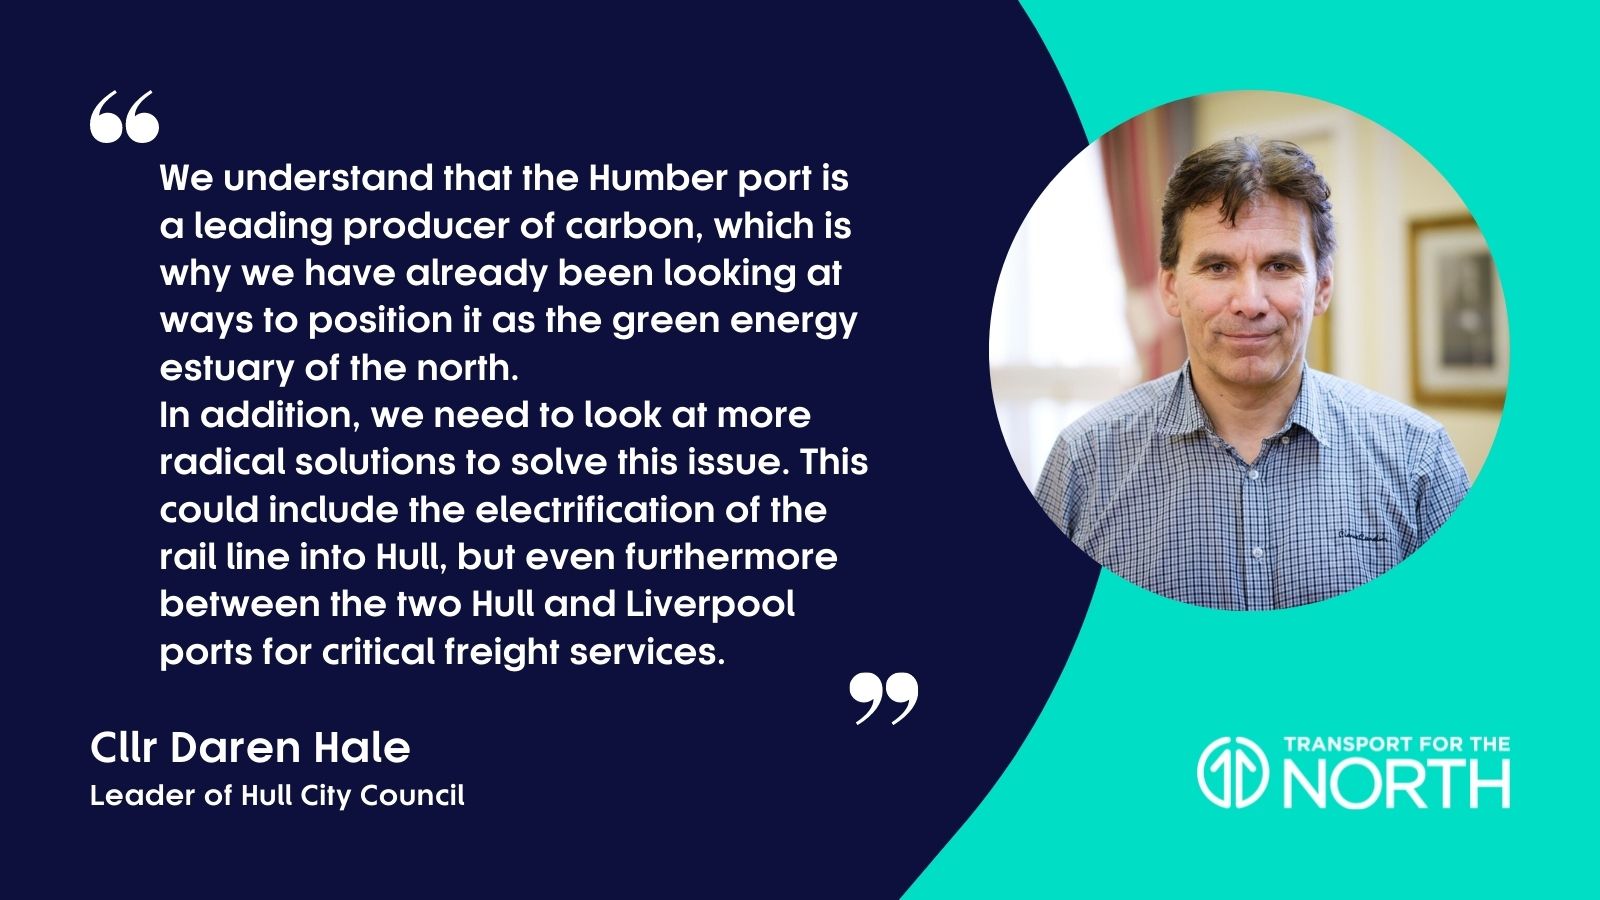 Cllr Daren Hale on the Transport for the North Decarbonisation Strategy